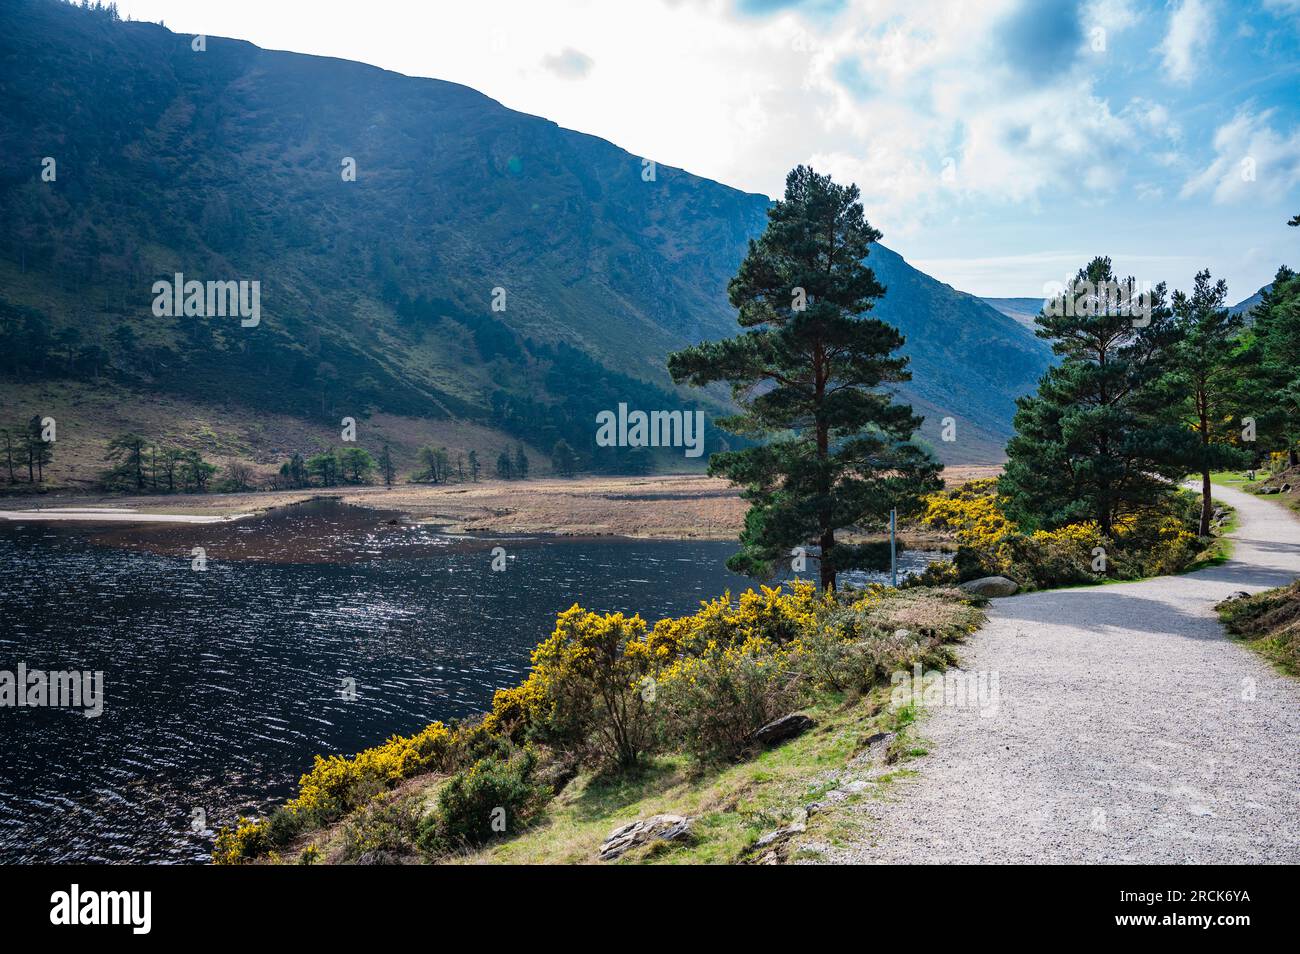 The River Running Along the Pathway, Glendalough, County Wicklow, Republic of Ireland Stock Photo